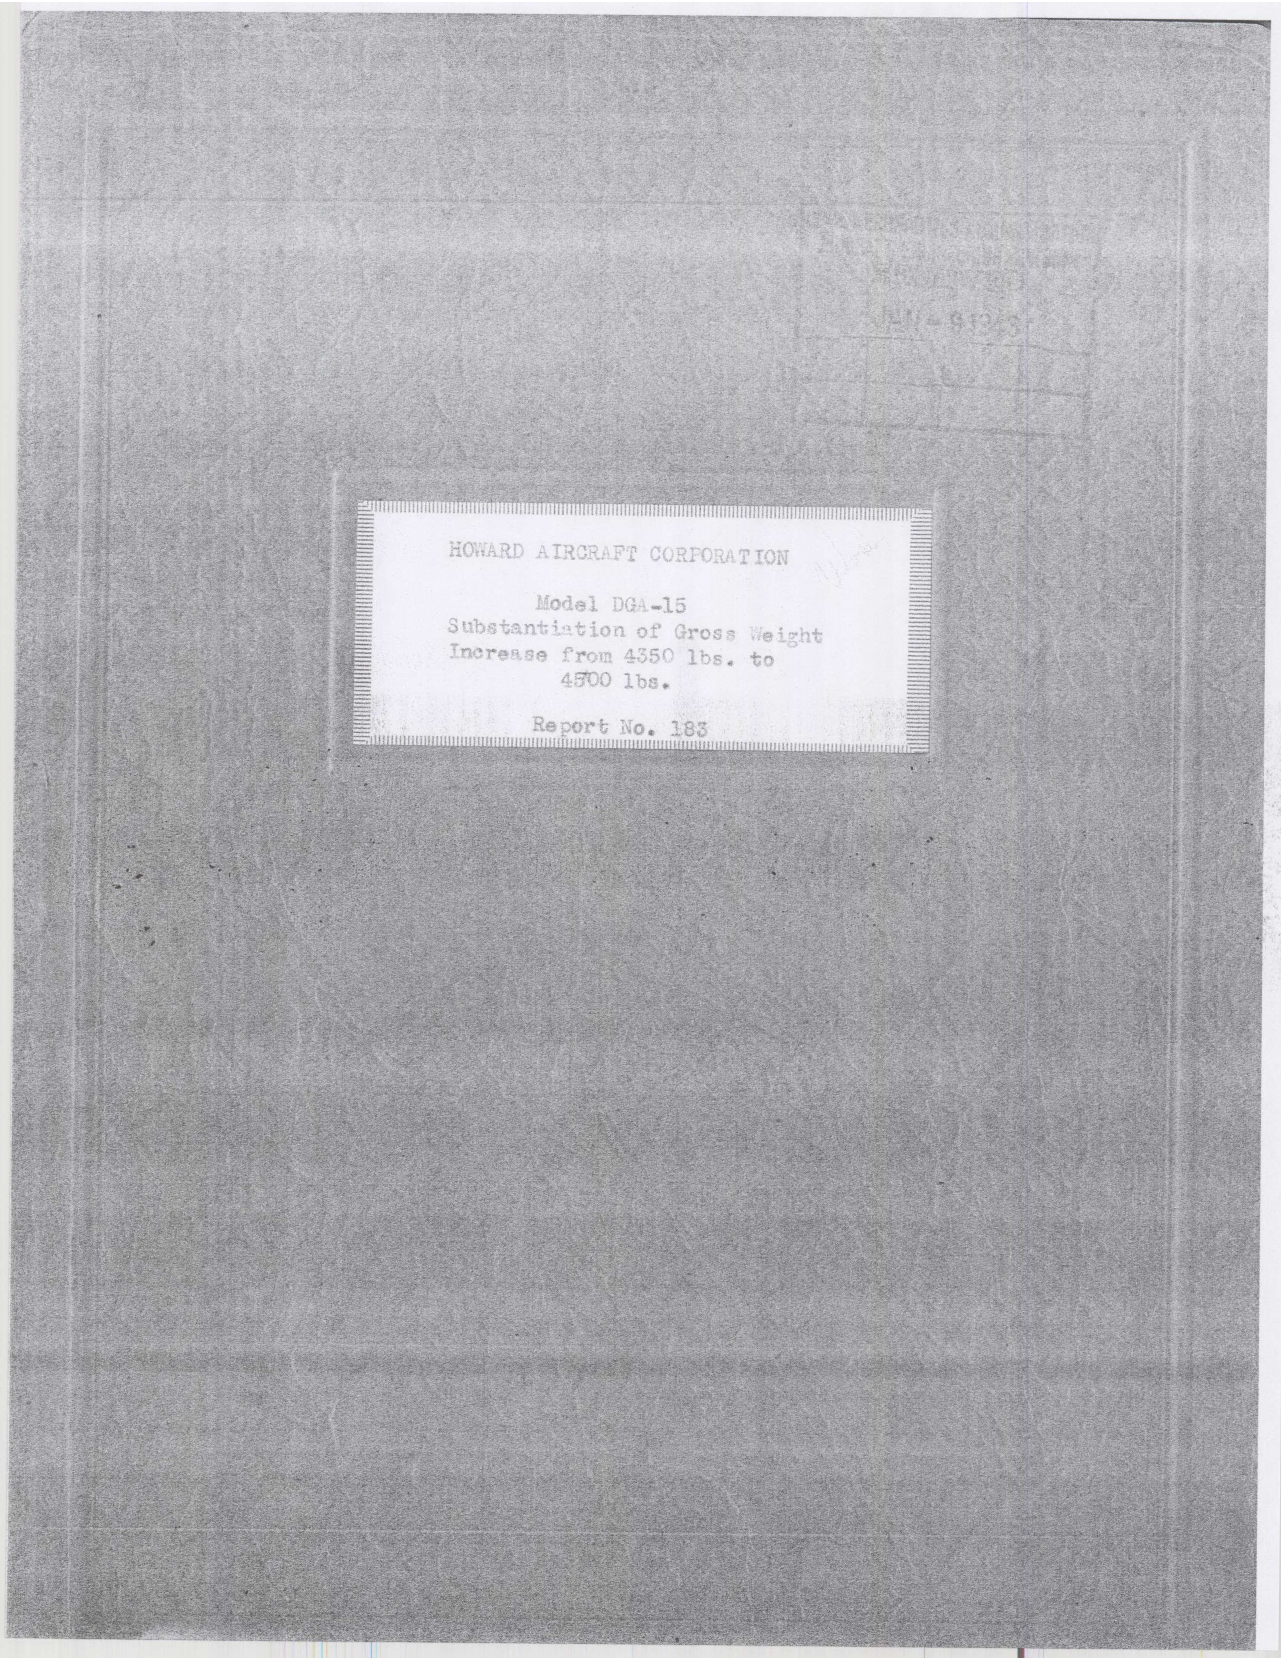 Sample page 1 from AirCorps Library document: Report 183, Substantiation of Gross Weight from 4350 to 4500 Pounds, DGA-15